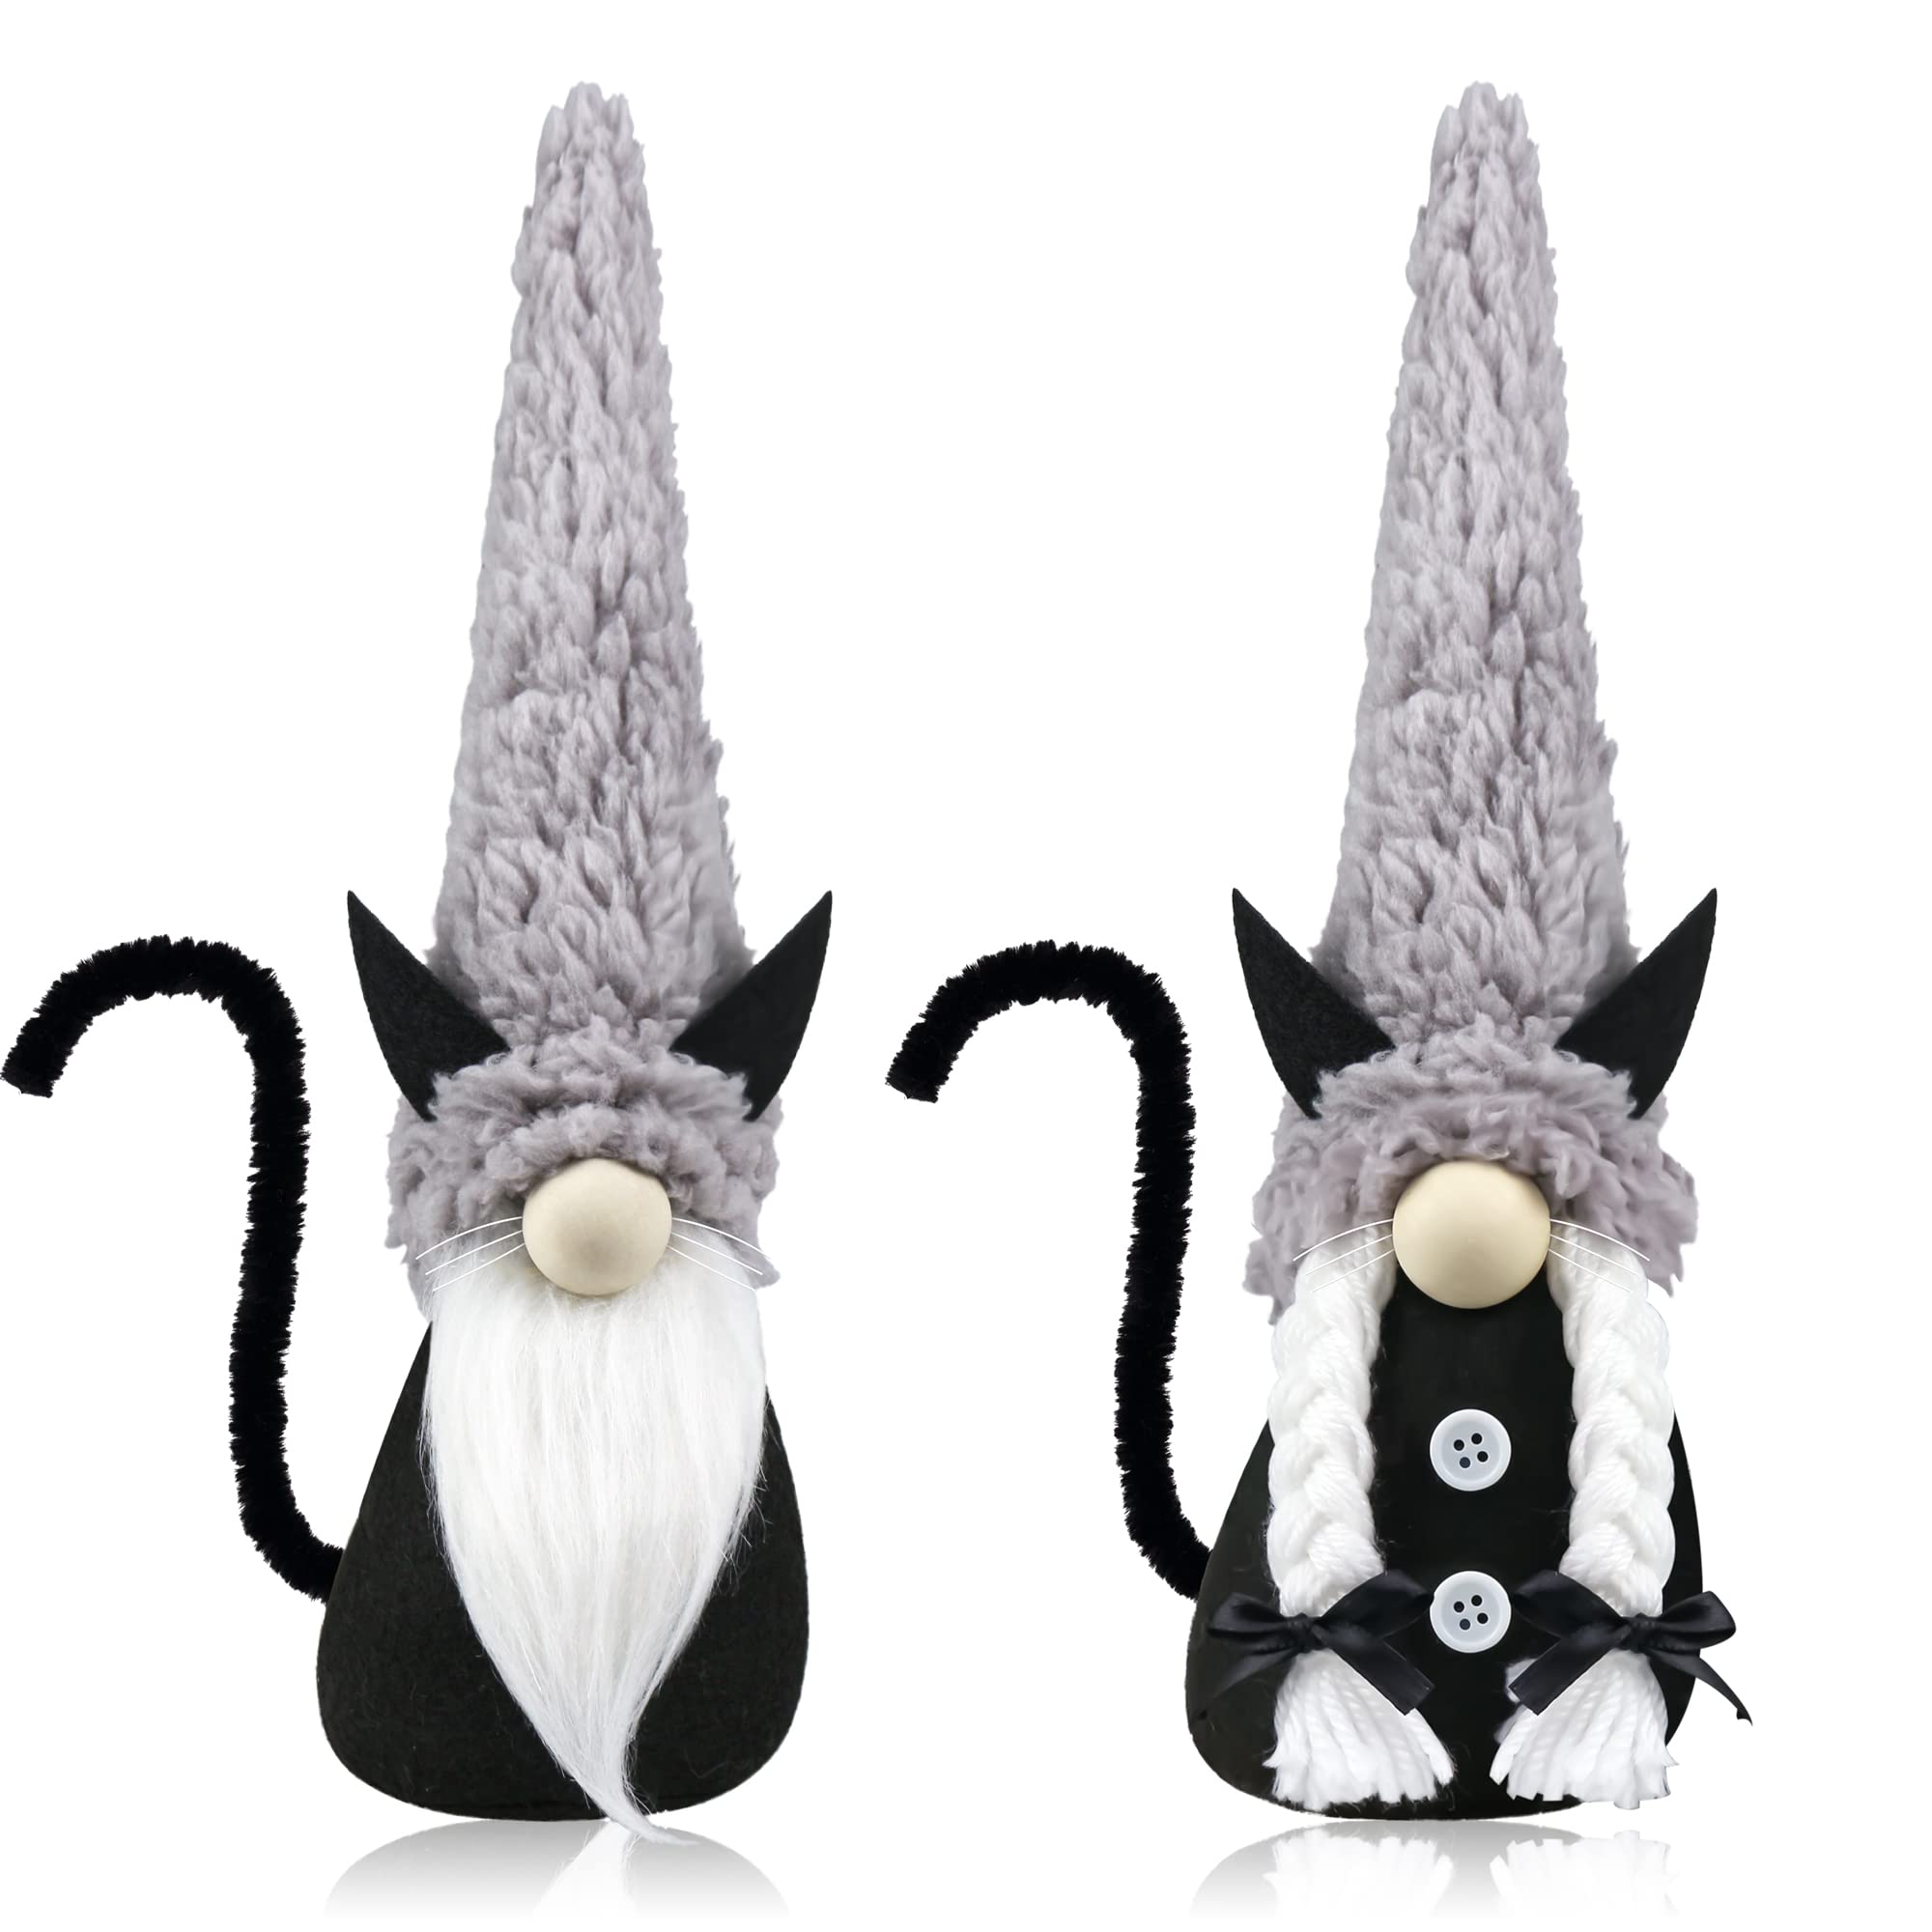 Halloween Black Cat Gnomes Plush Decorations- 2Pcs Mr & Mrs Handmade Swedish Tomte Cat Gnome Decor for Mantle Fireplace- Halloween Festive Haunted House Farmhouse Home Gift Tiered Tray Decor